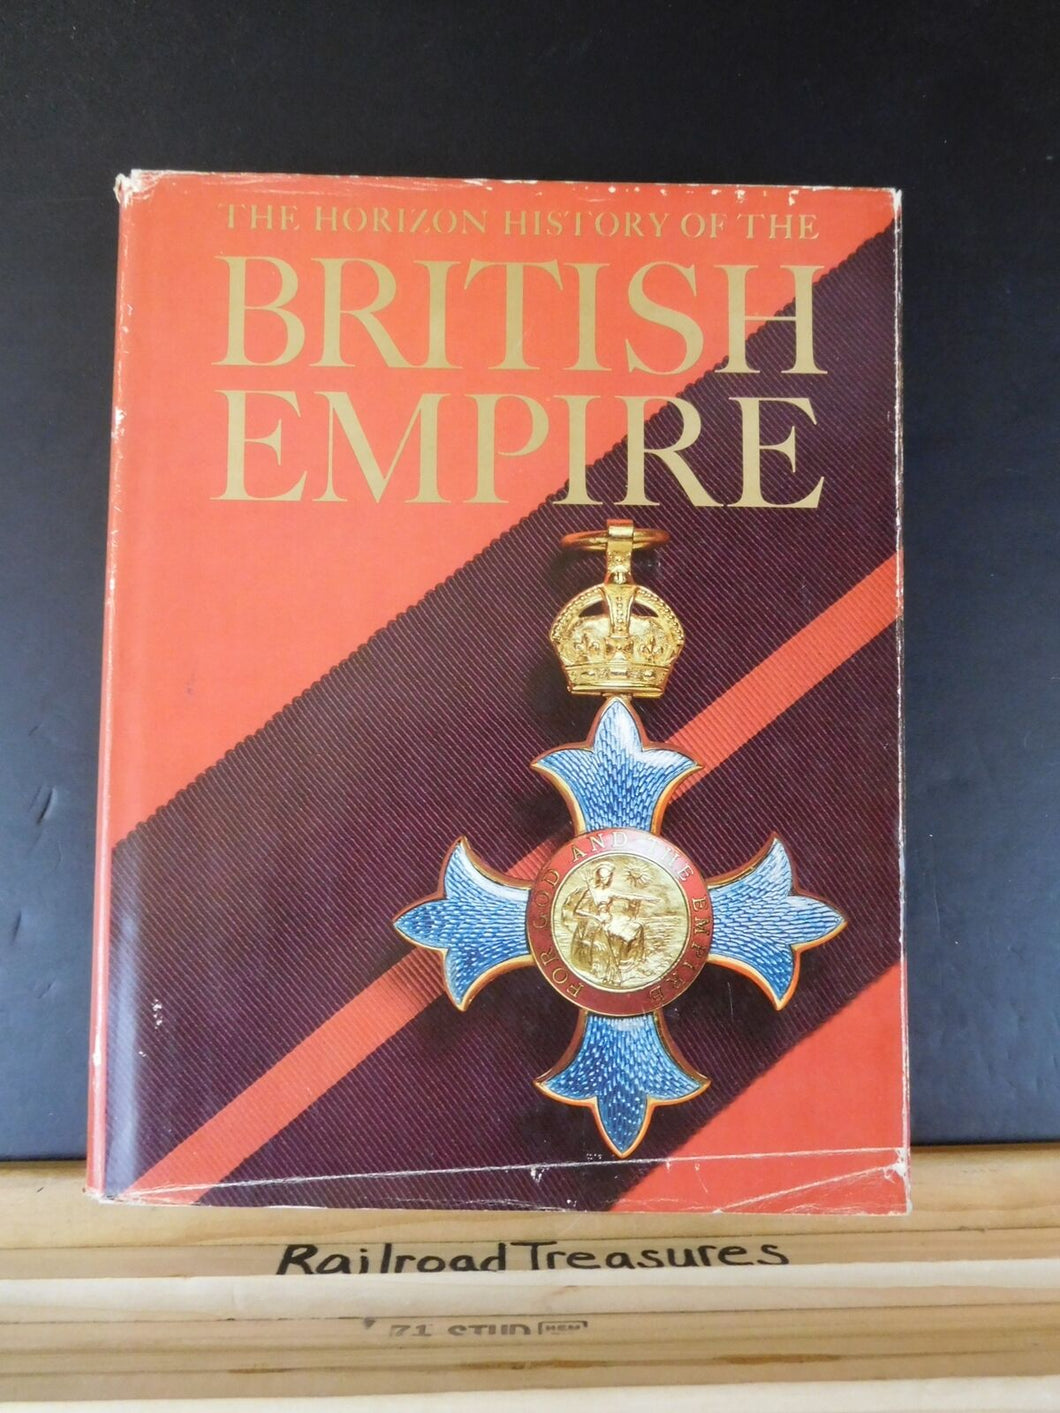 Horizon History of the British Empire edited by Stephen W Sears